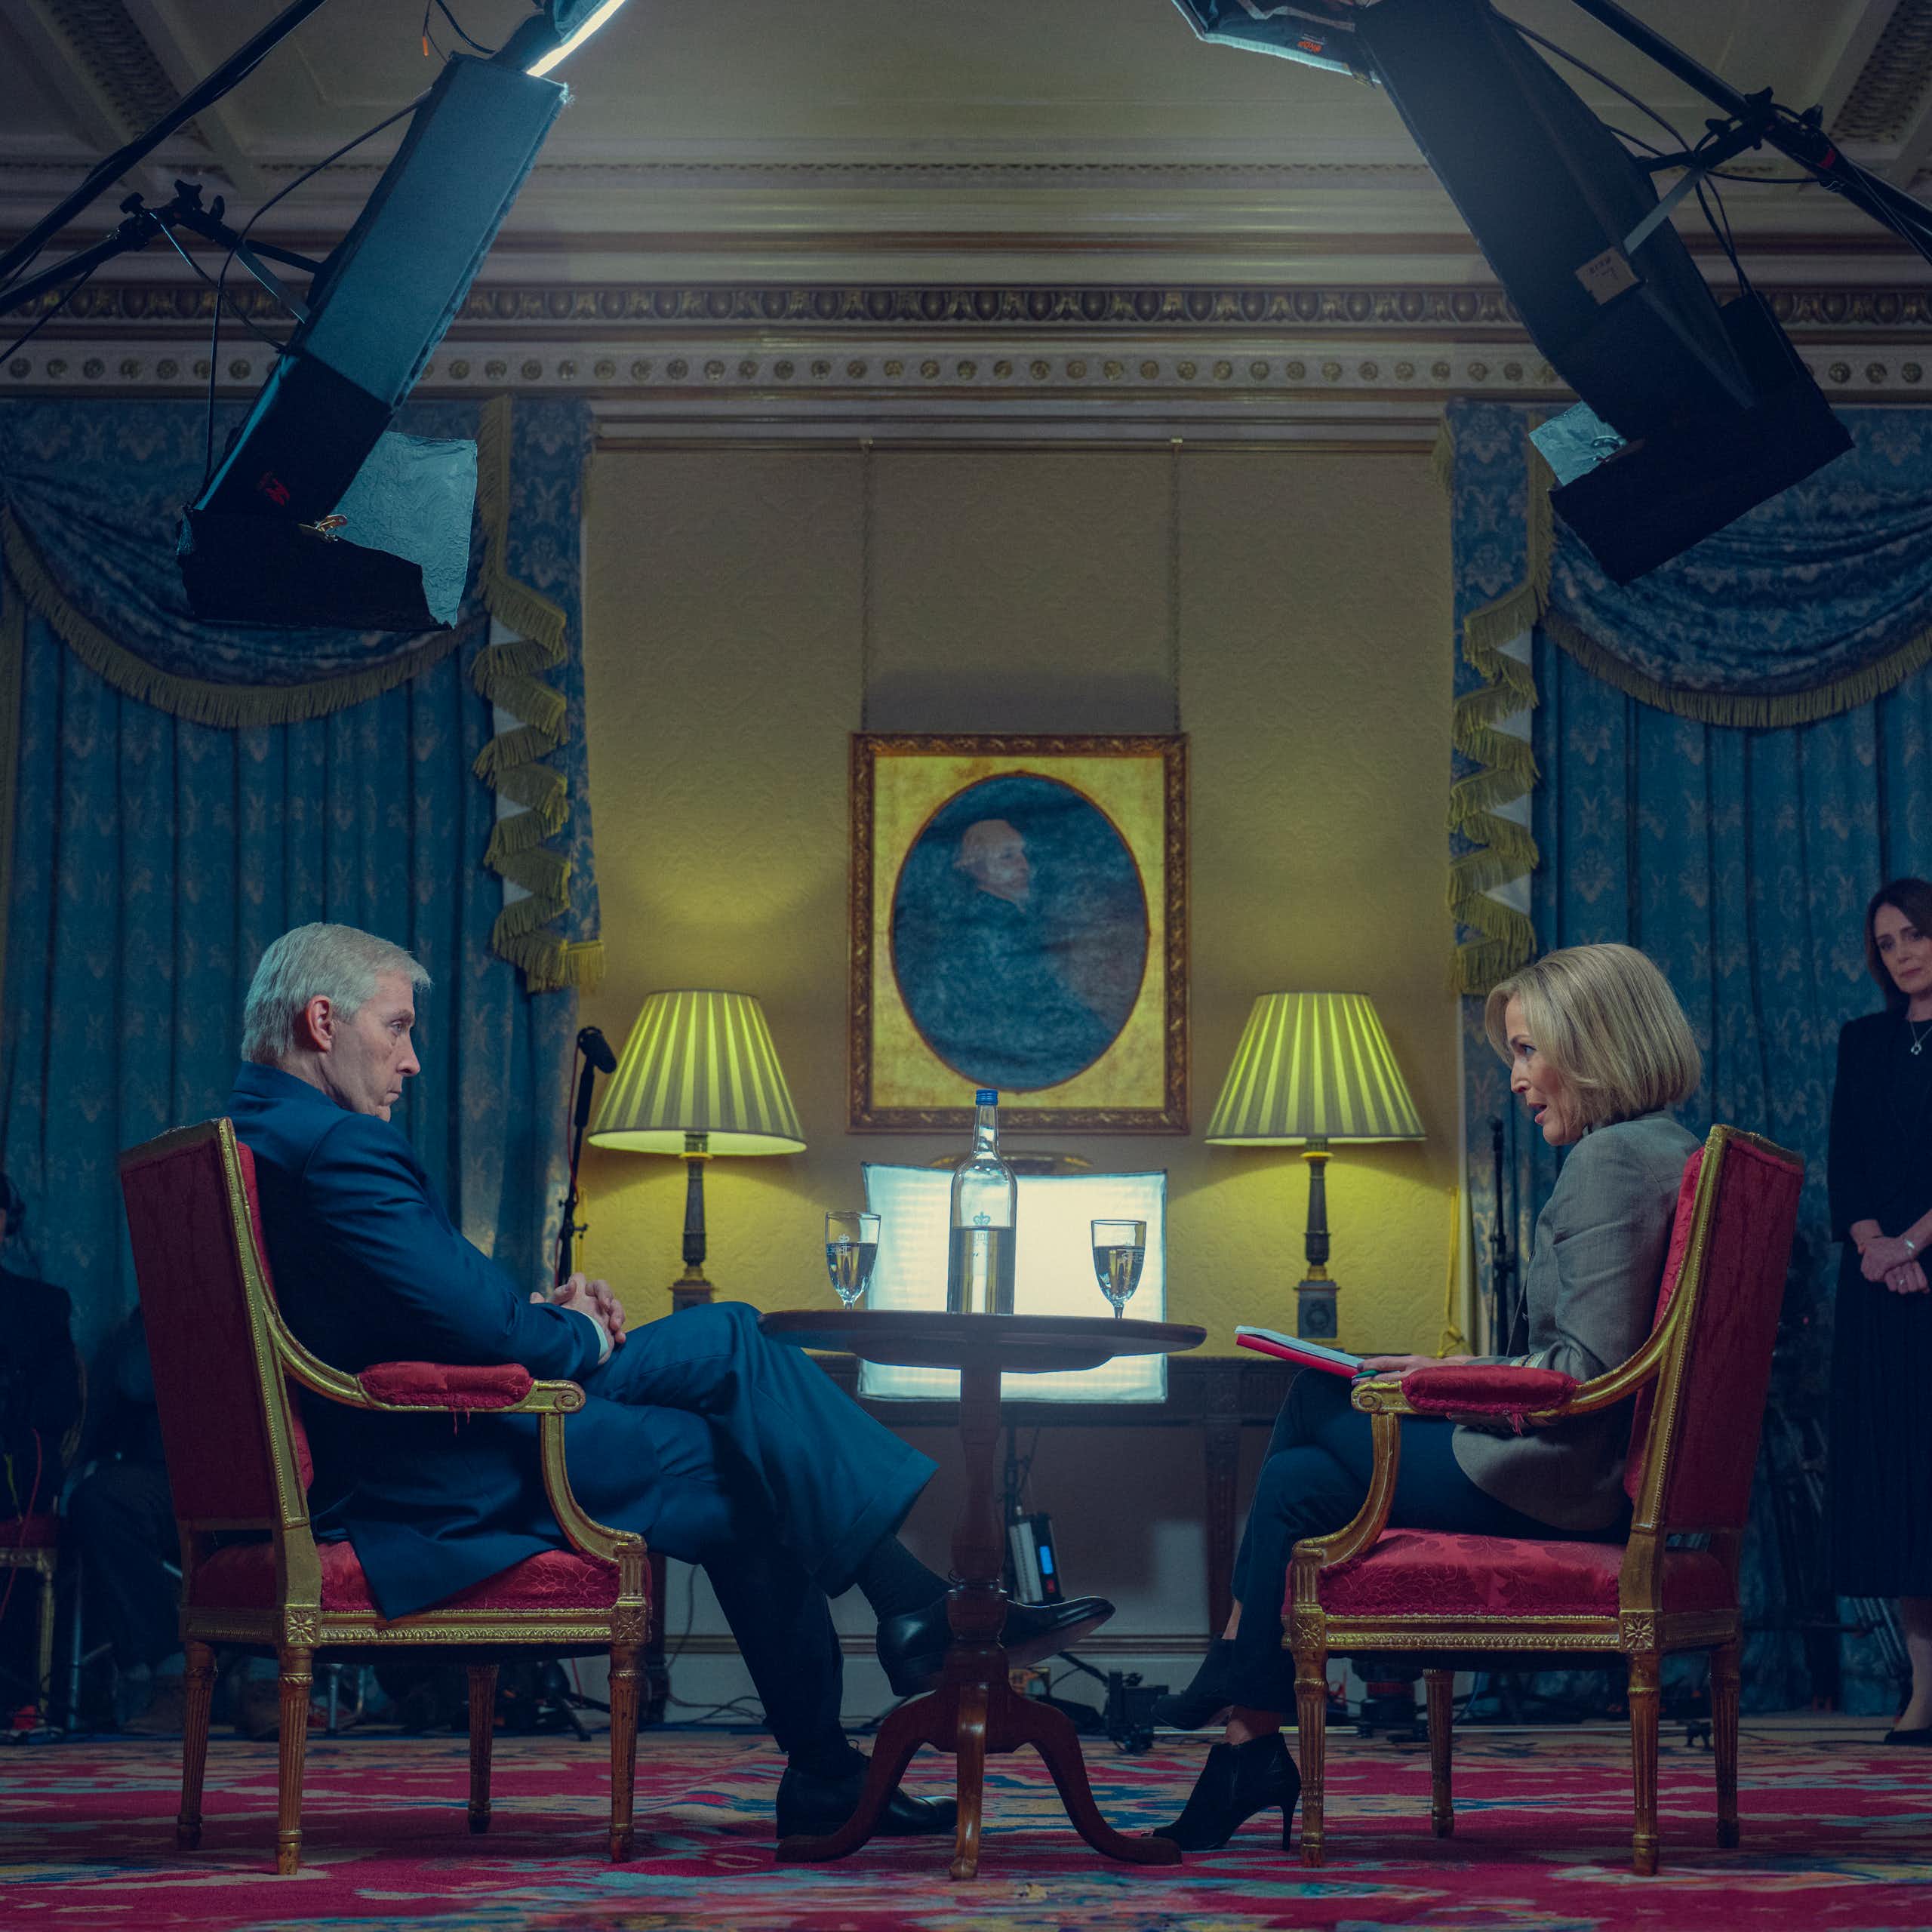 Still image of Sewell and Anderson in character, seated in red chairs doing the infamous Newsnight interview beneath tv cameras and lights